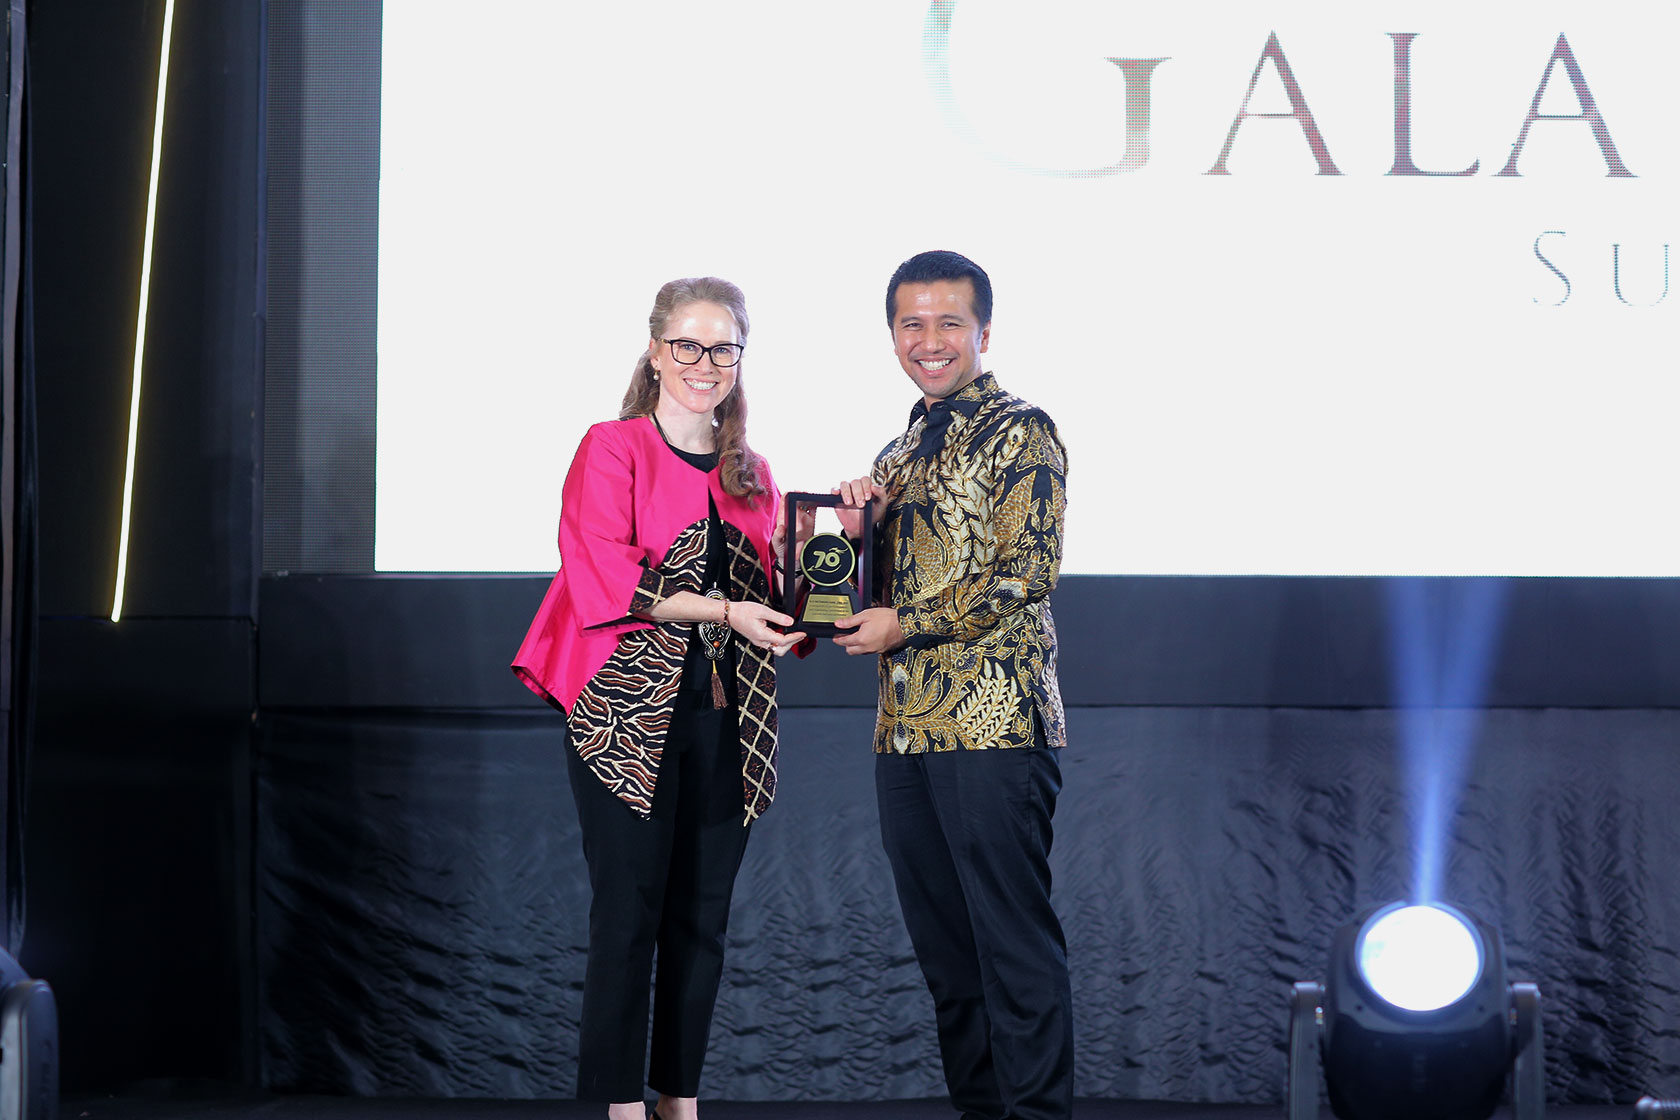 The Australian Consul-General in Surabaya Fiona Hoggart gives an award to Emil Dardak in honour of his father, the late Achmad Hermanto Dardak, former Vice Minister of Public Works A Touching Tribute: Australian Consul-General in Surabaya, Fiona Hoggart, presents an Award to Emil Dardak in honour of his late father, Achmad Hermanto Dardak, former Vice Minister of Public Works.